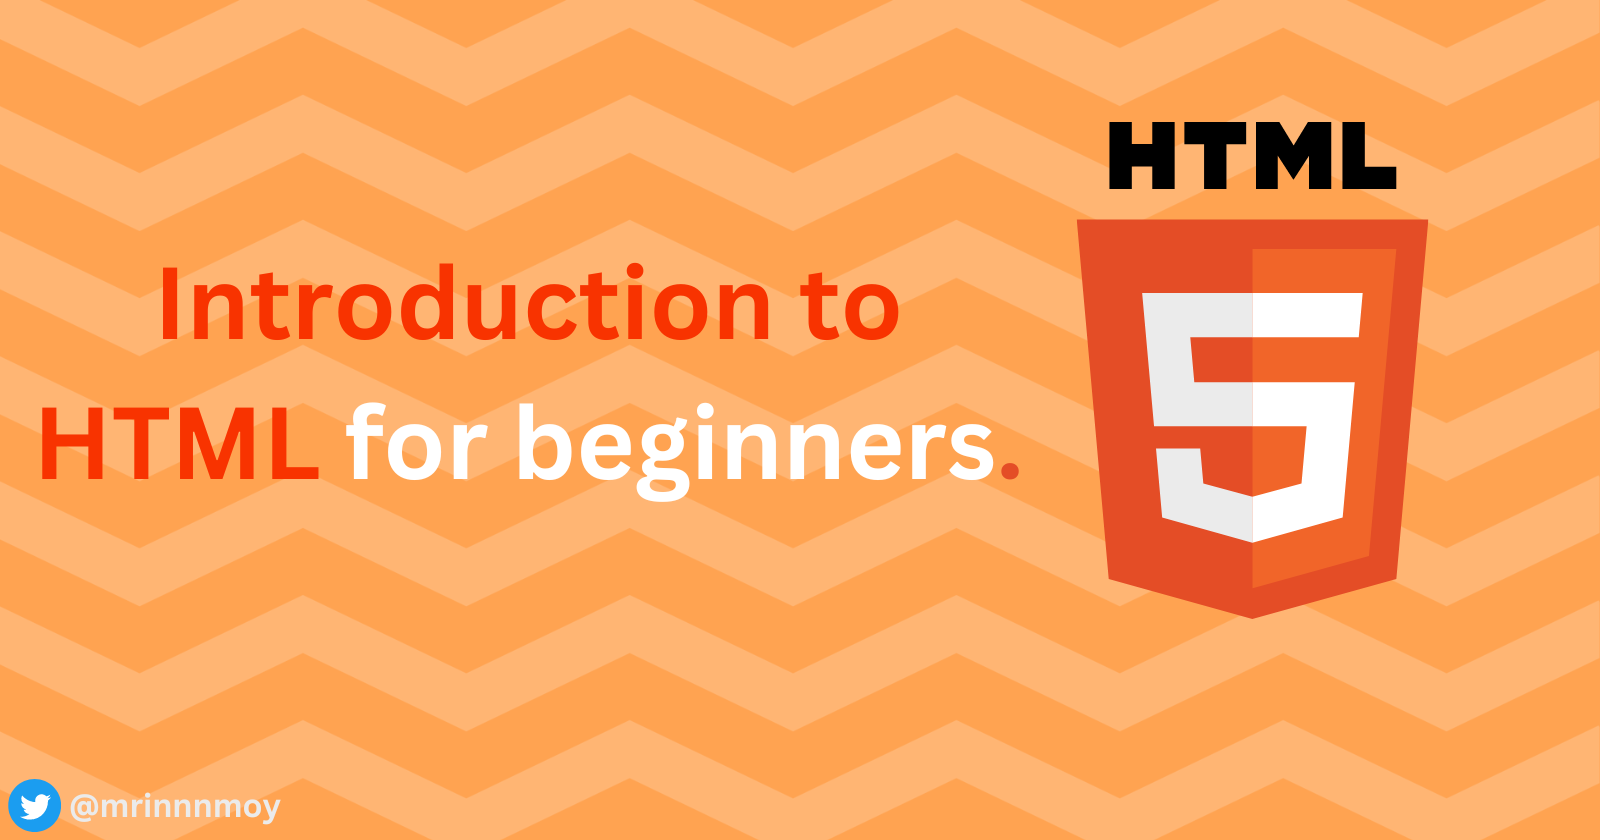 Introduction to HTML for beginners.